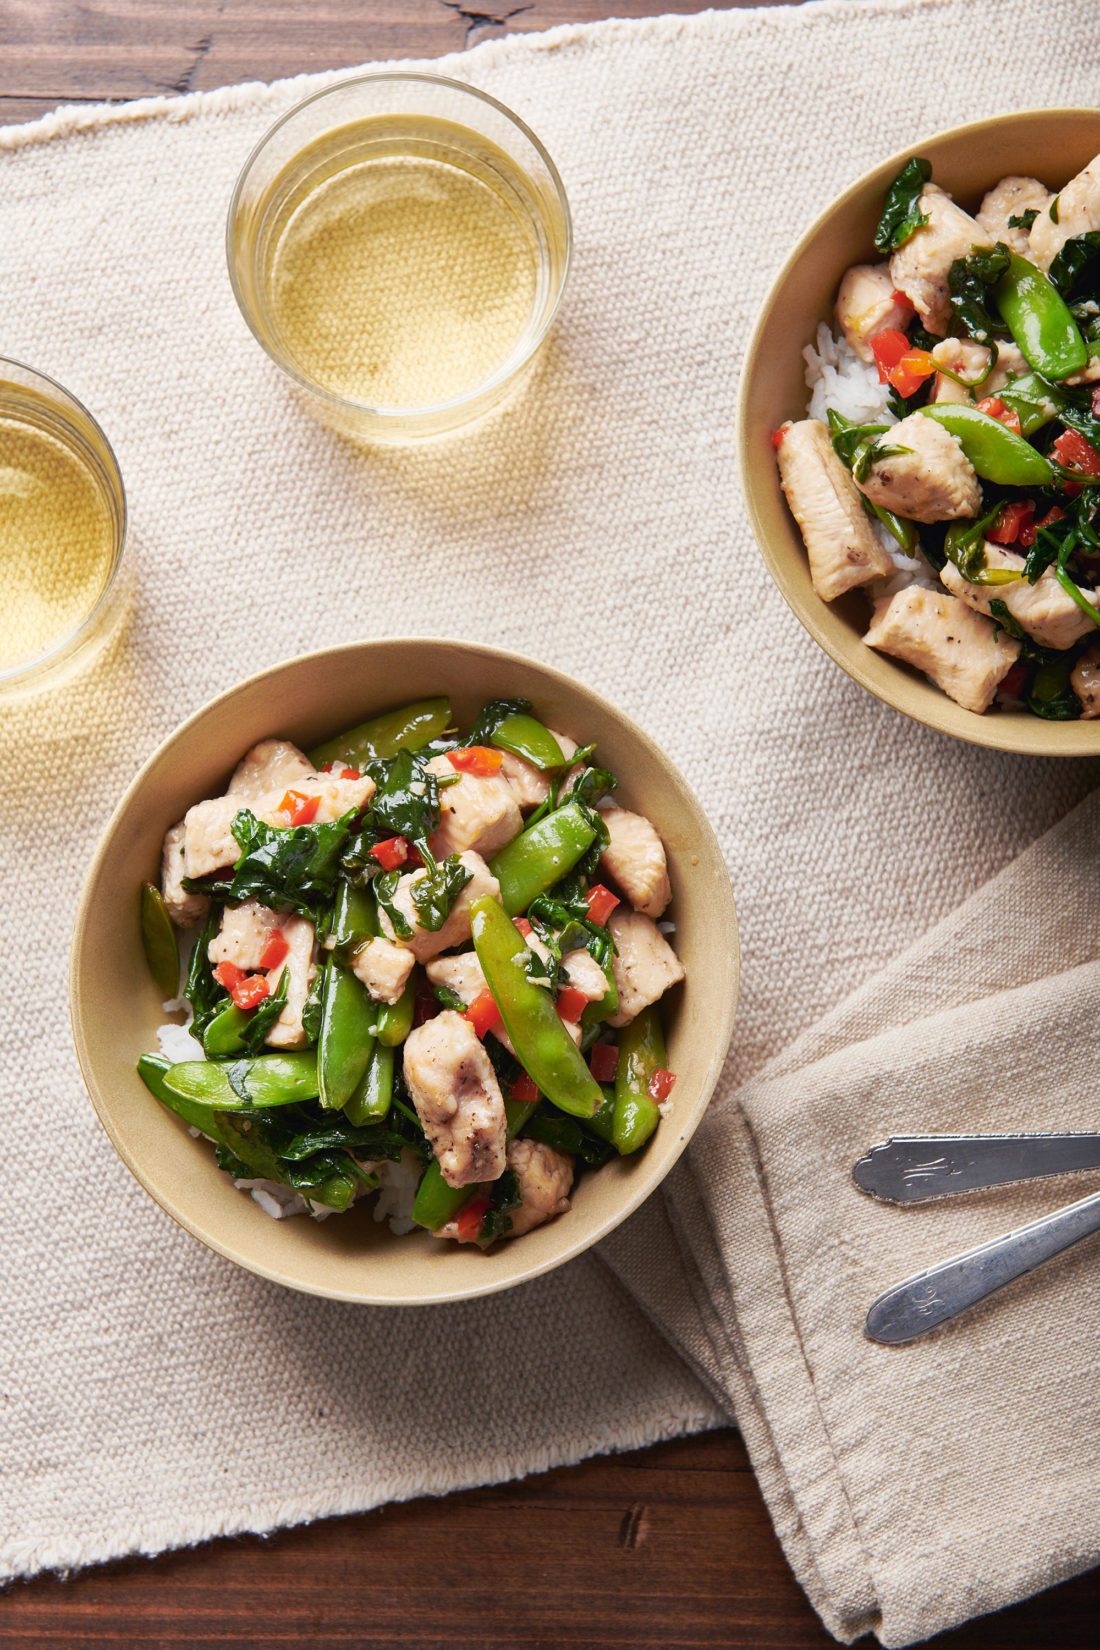 Chicken and Spinach Stir-Fry with Ginger and Oyster Sauce